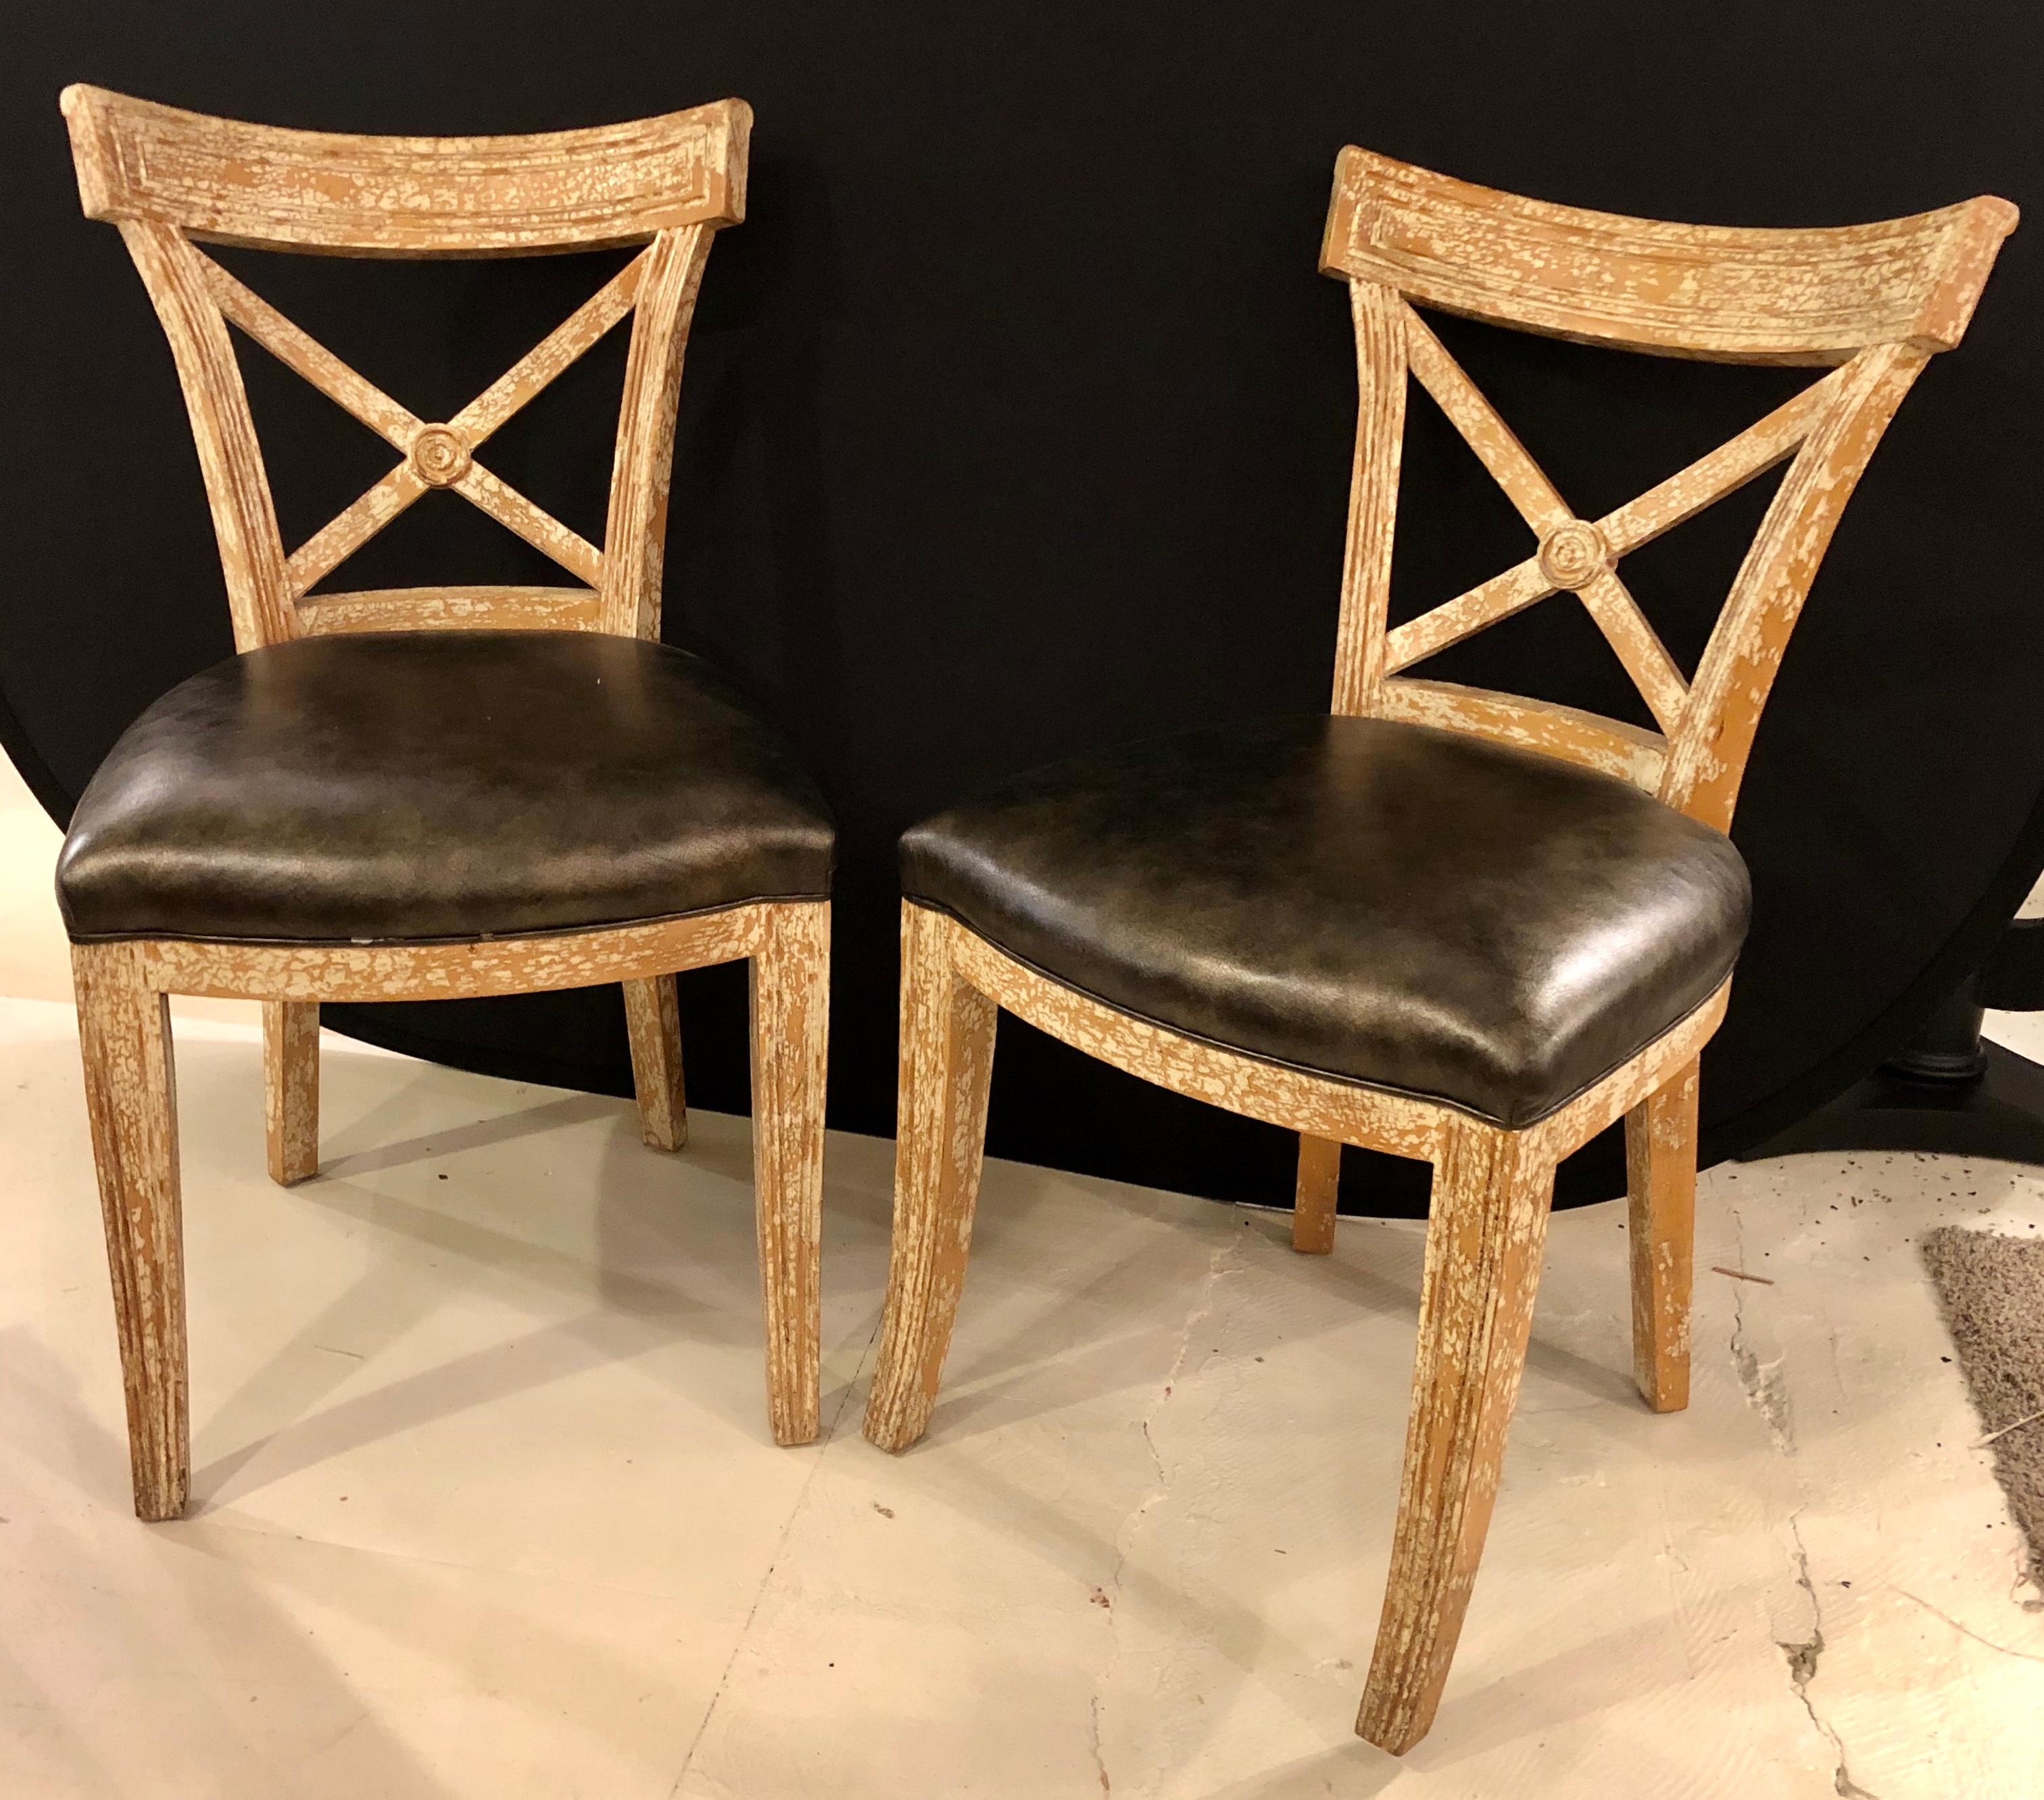 Pair of black leather seat side chairs. Each of these Hollywood Regency side chairs are done in a hand painted crackle-ware finish. The large X-form back rest flowing from a center sphere leading to a black leather seat rest on tapering legs. The